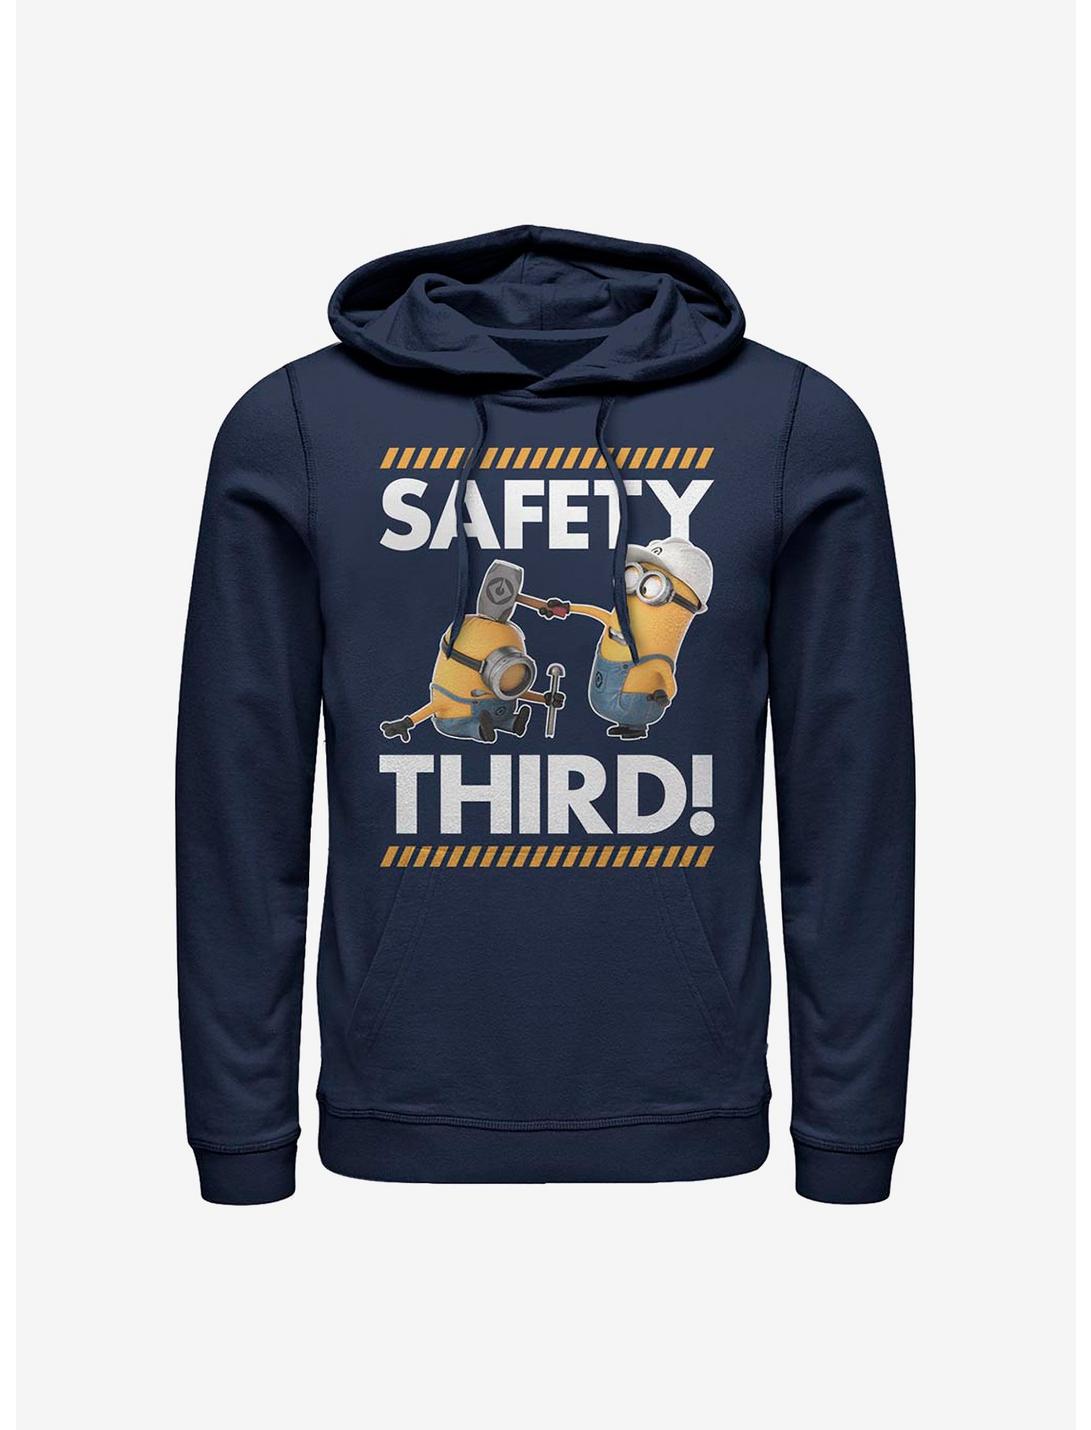 Minions Safety Third Hoodie, NAVY, hi-res